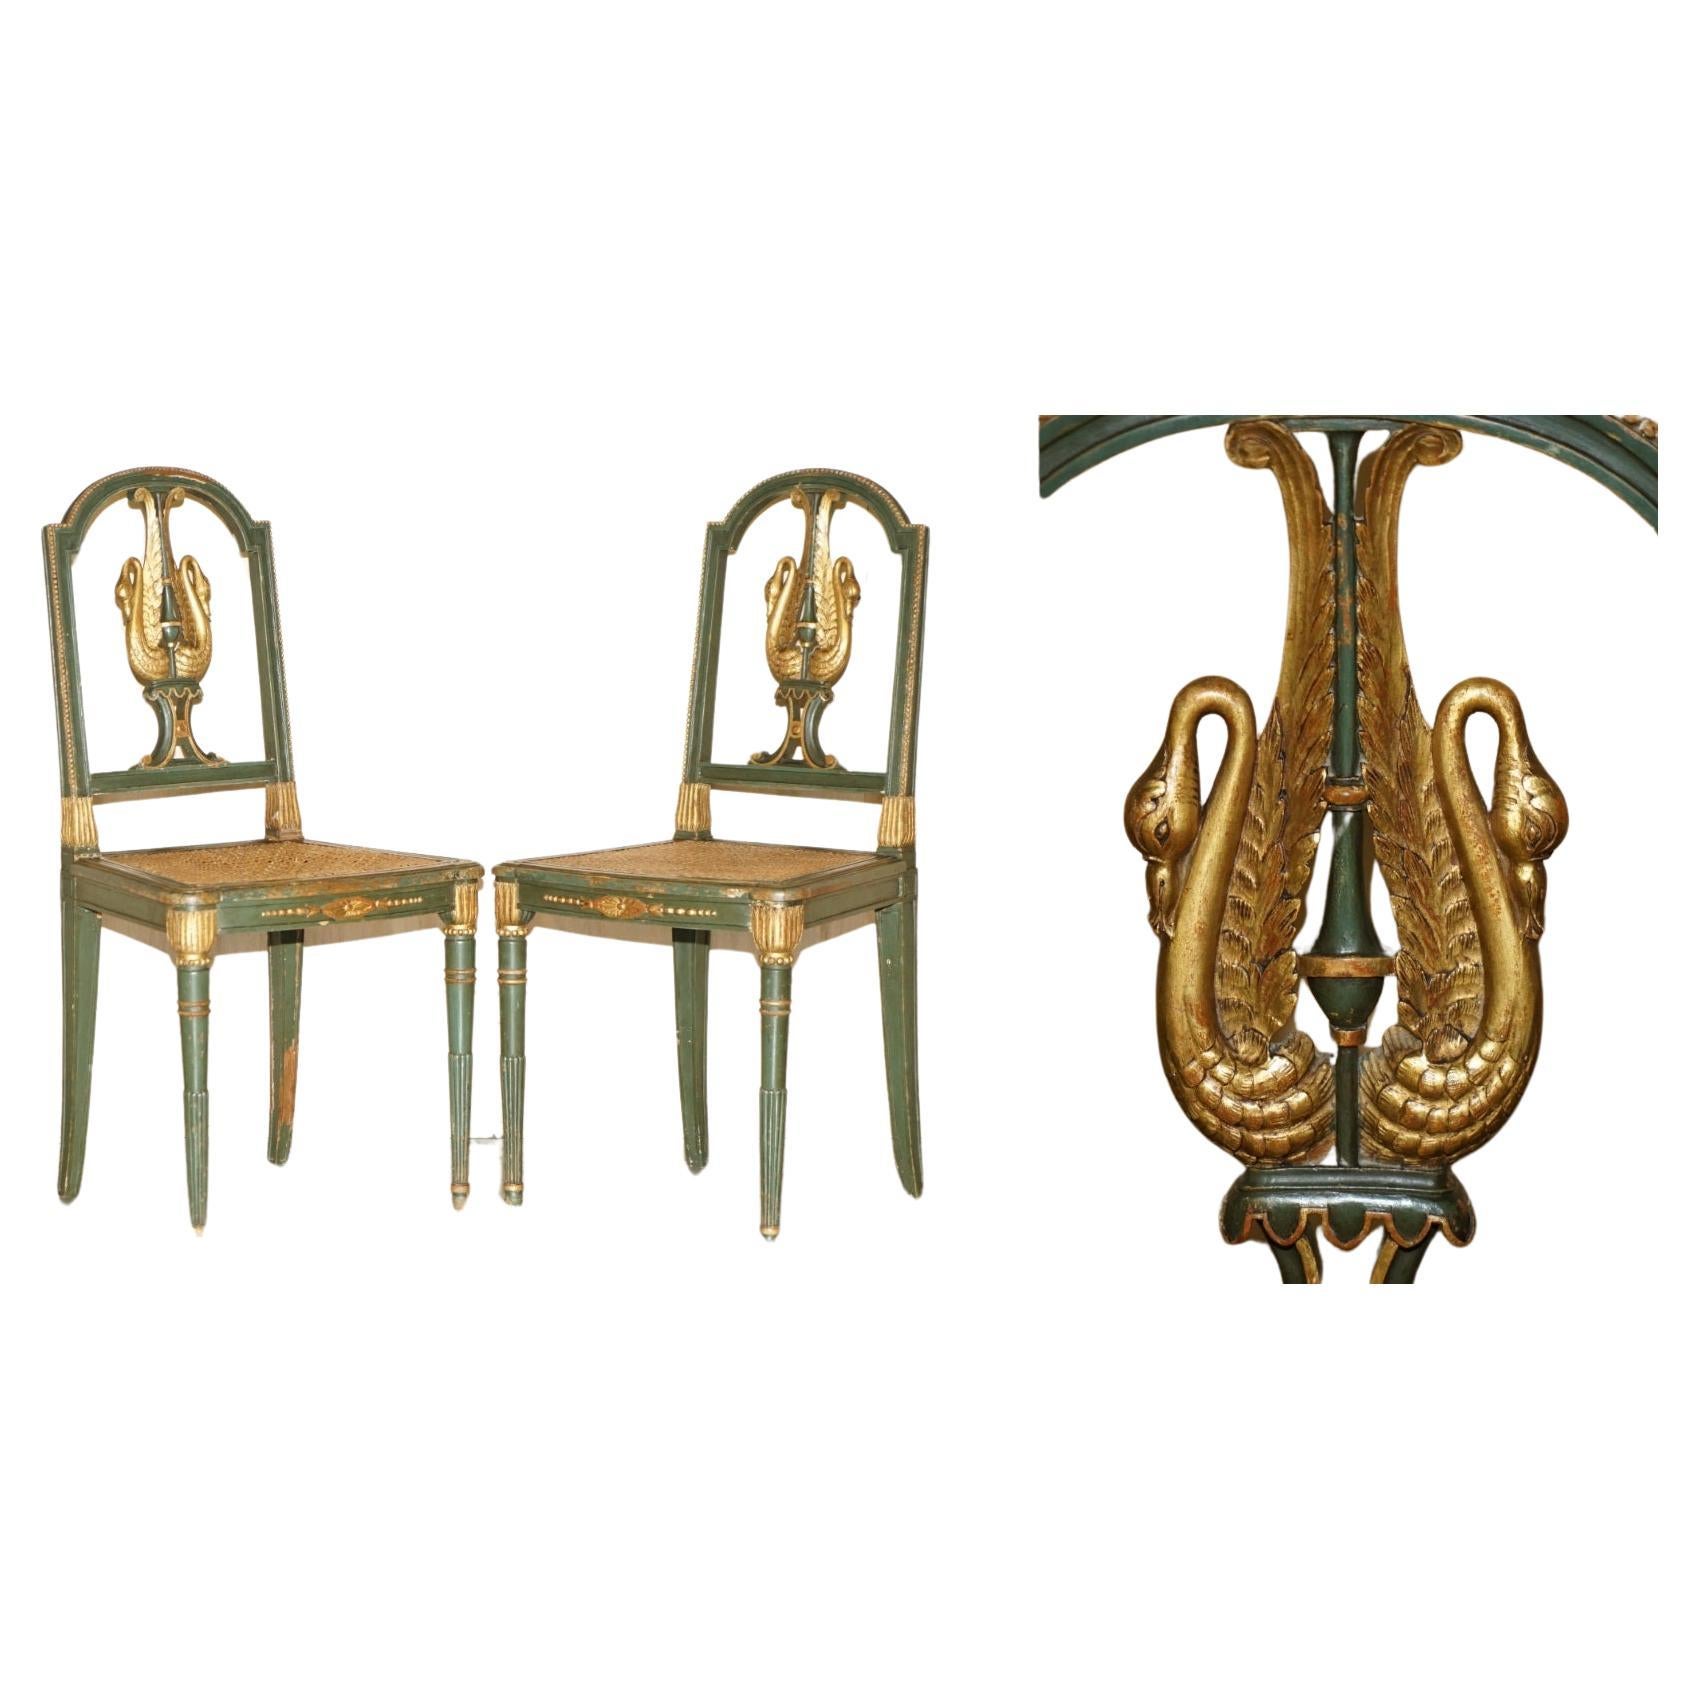 ANTIQUE PAIR OF WILLIAM KENT EMPIRE GREEN & GOLD GILT SWAN CARVED SIDE CHAIRs For Sale